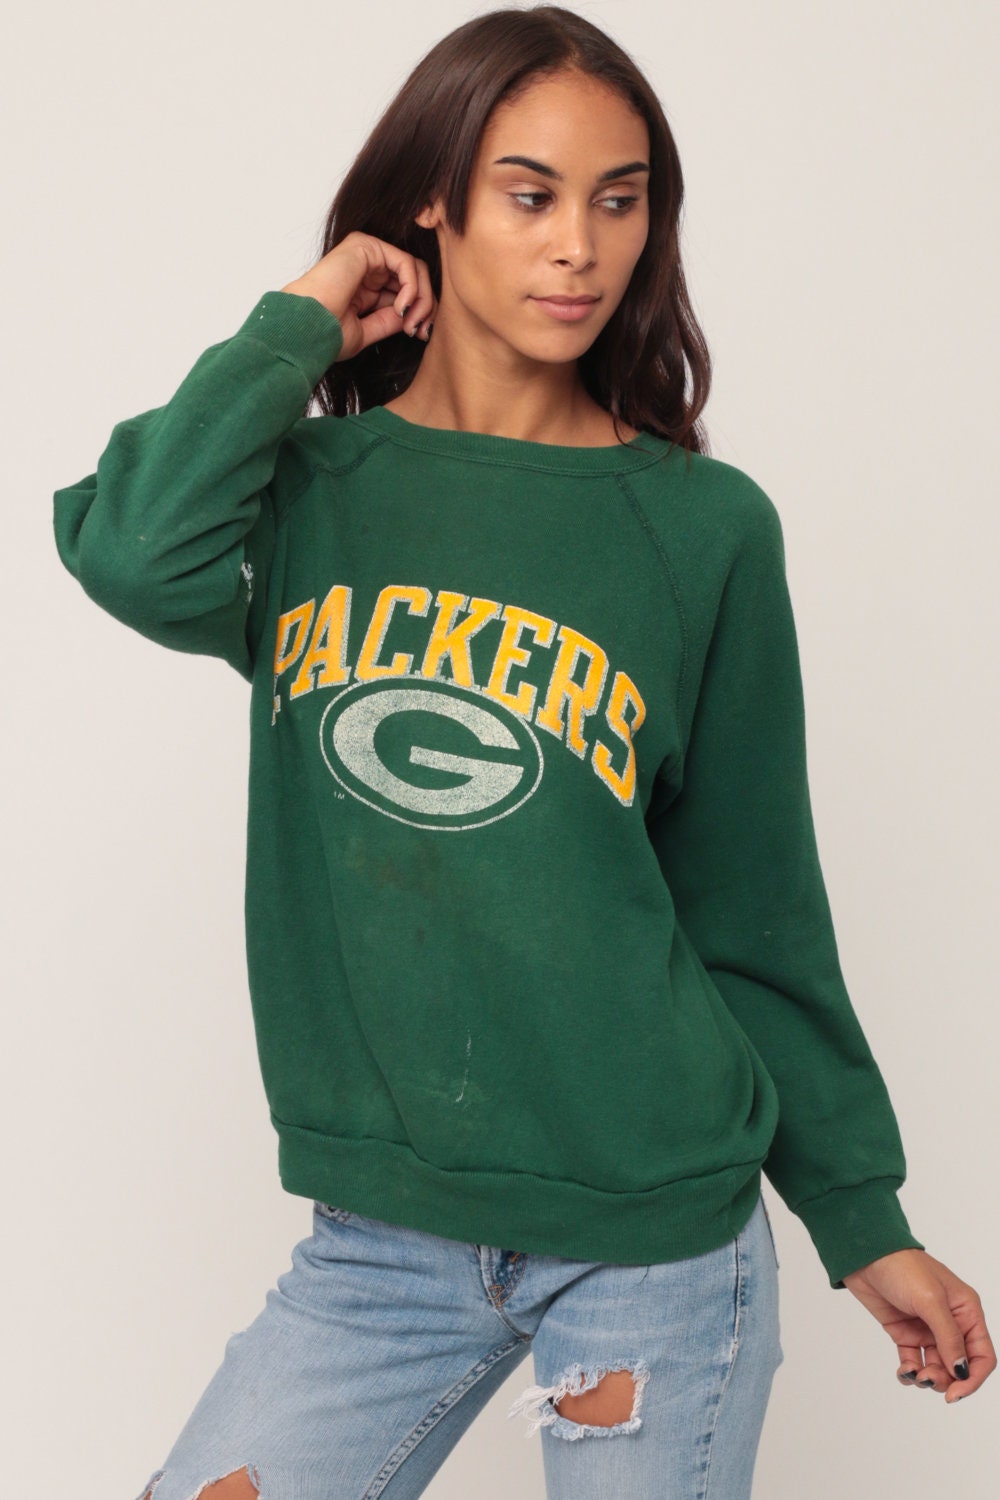 packers female shirts